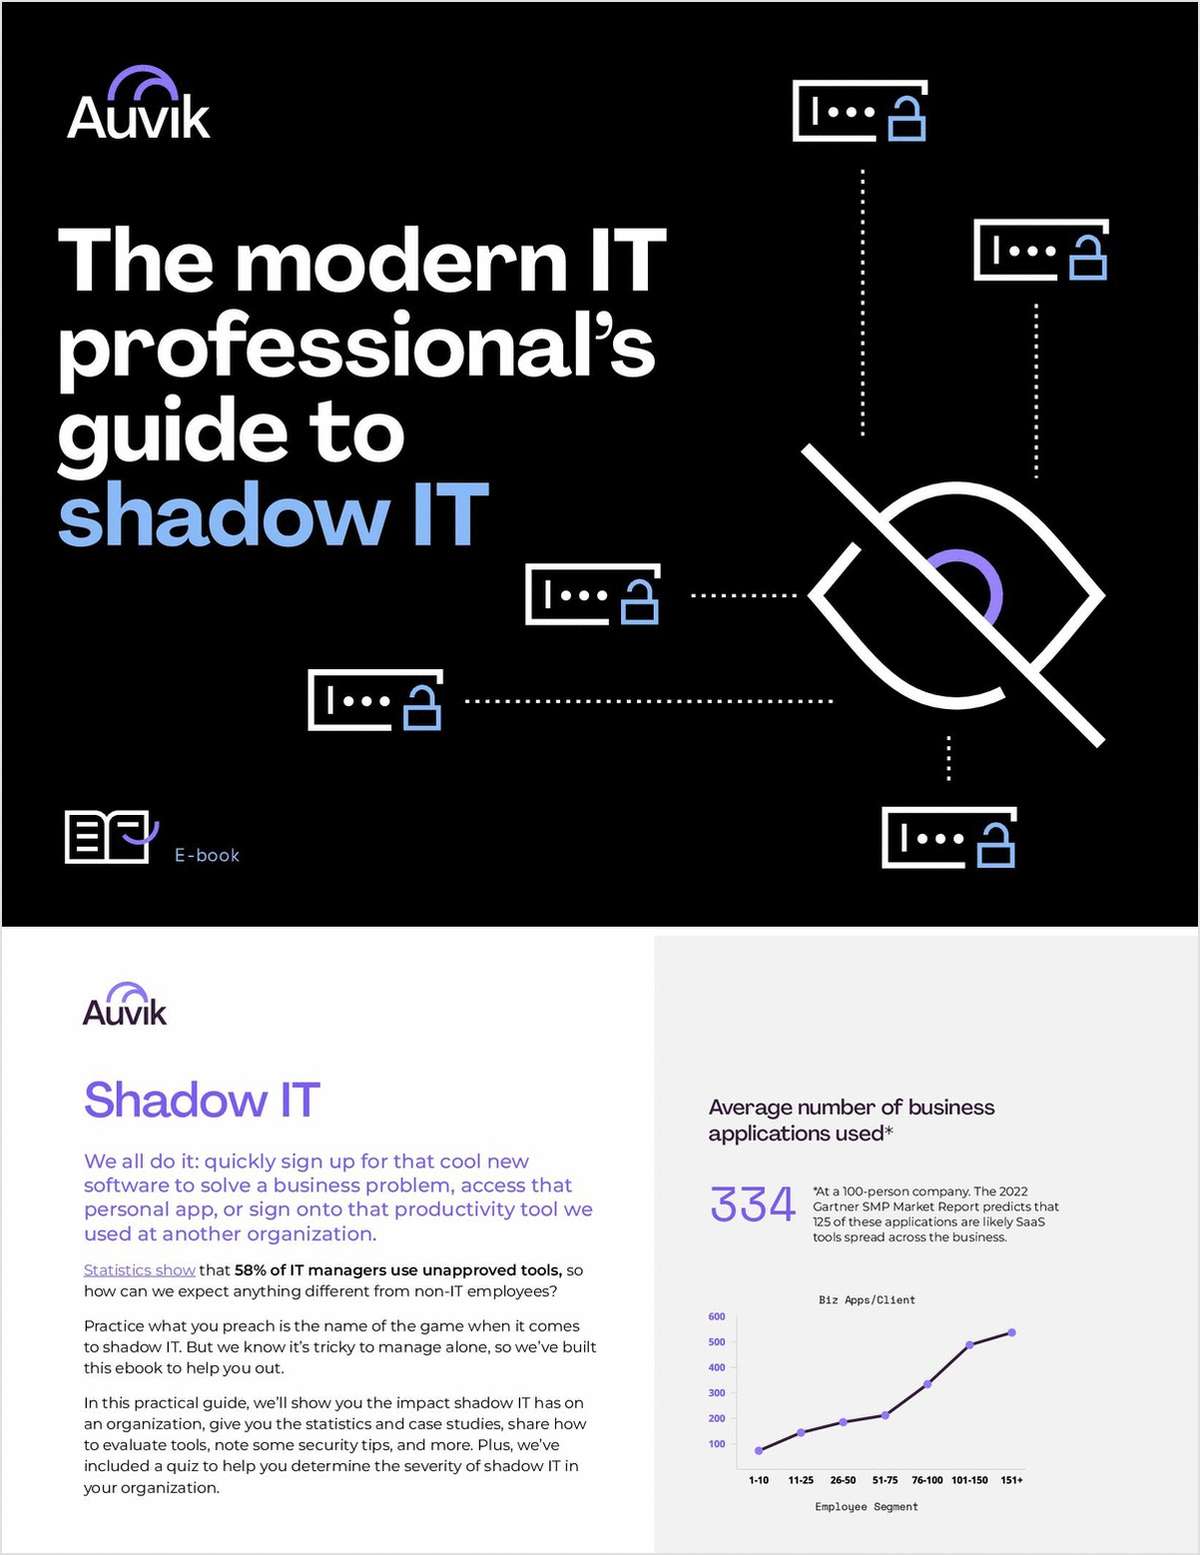 The Modern IT Professional's Guide to Shadow IT link